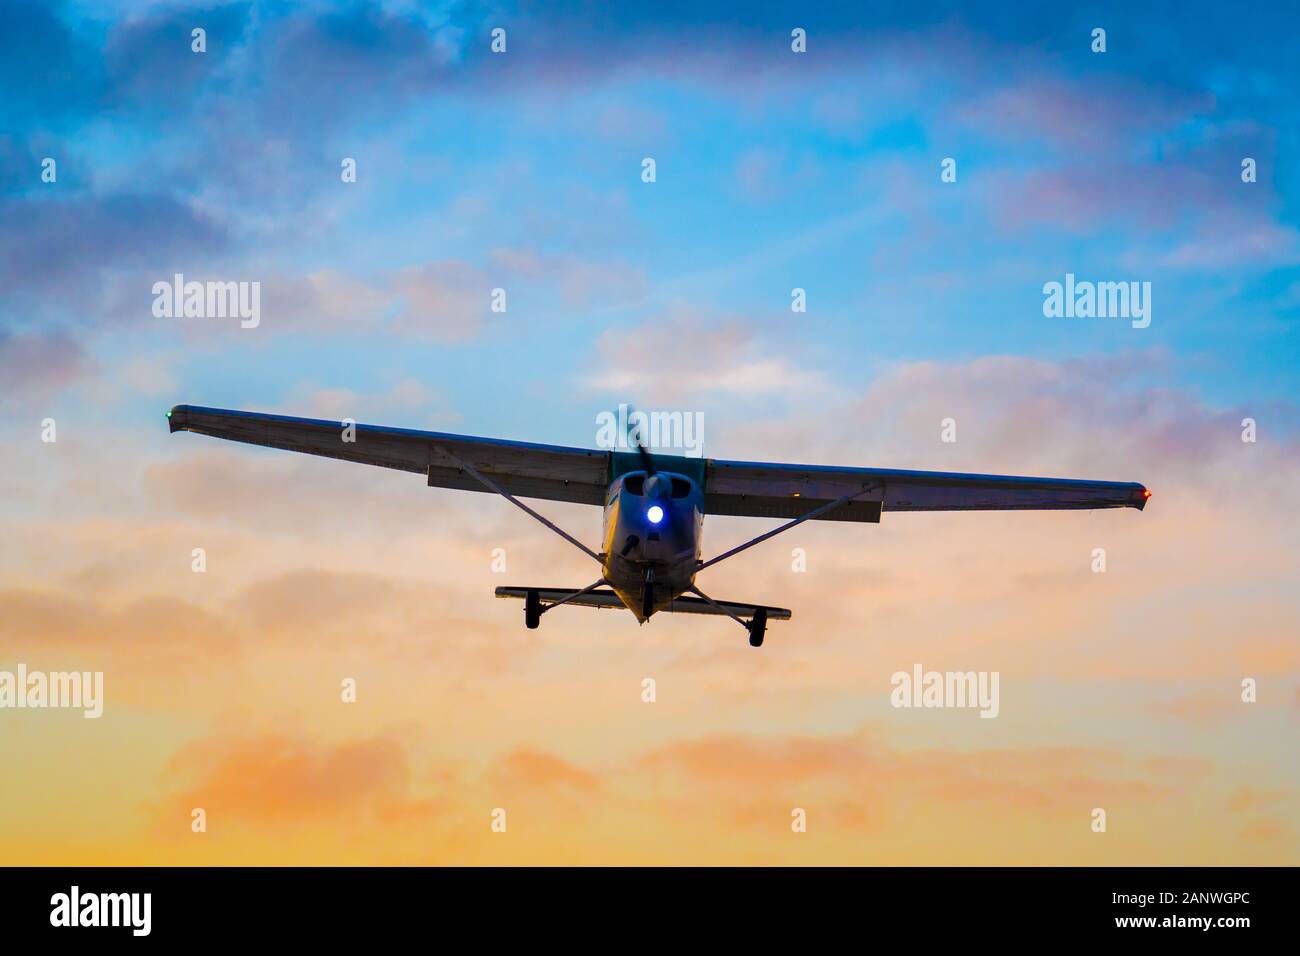 Shot of a silhouetted, unidentifiable private aircraft on final approach for landing as the sun sets. Stock Photo